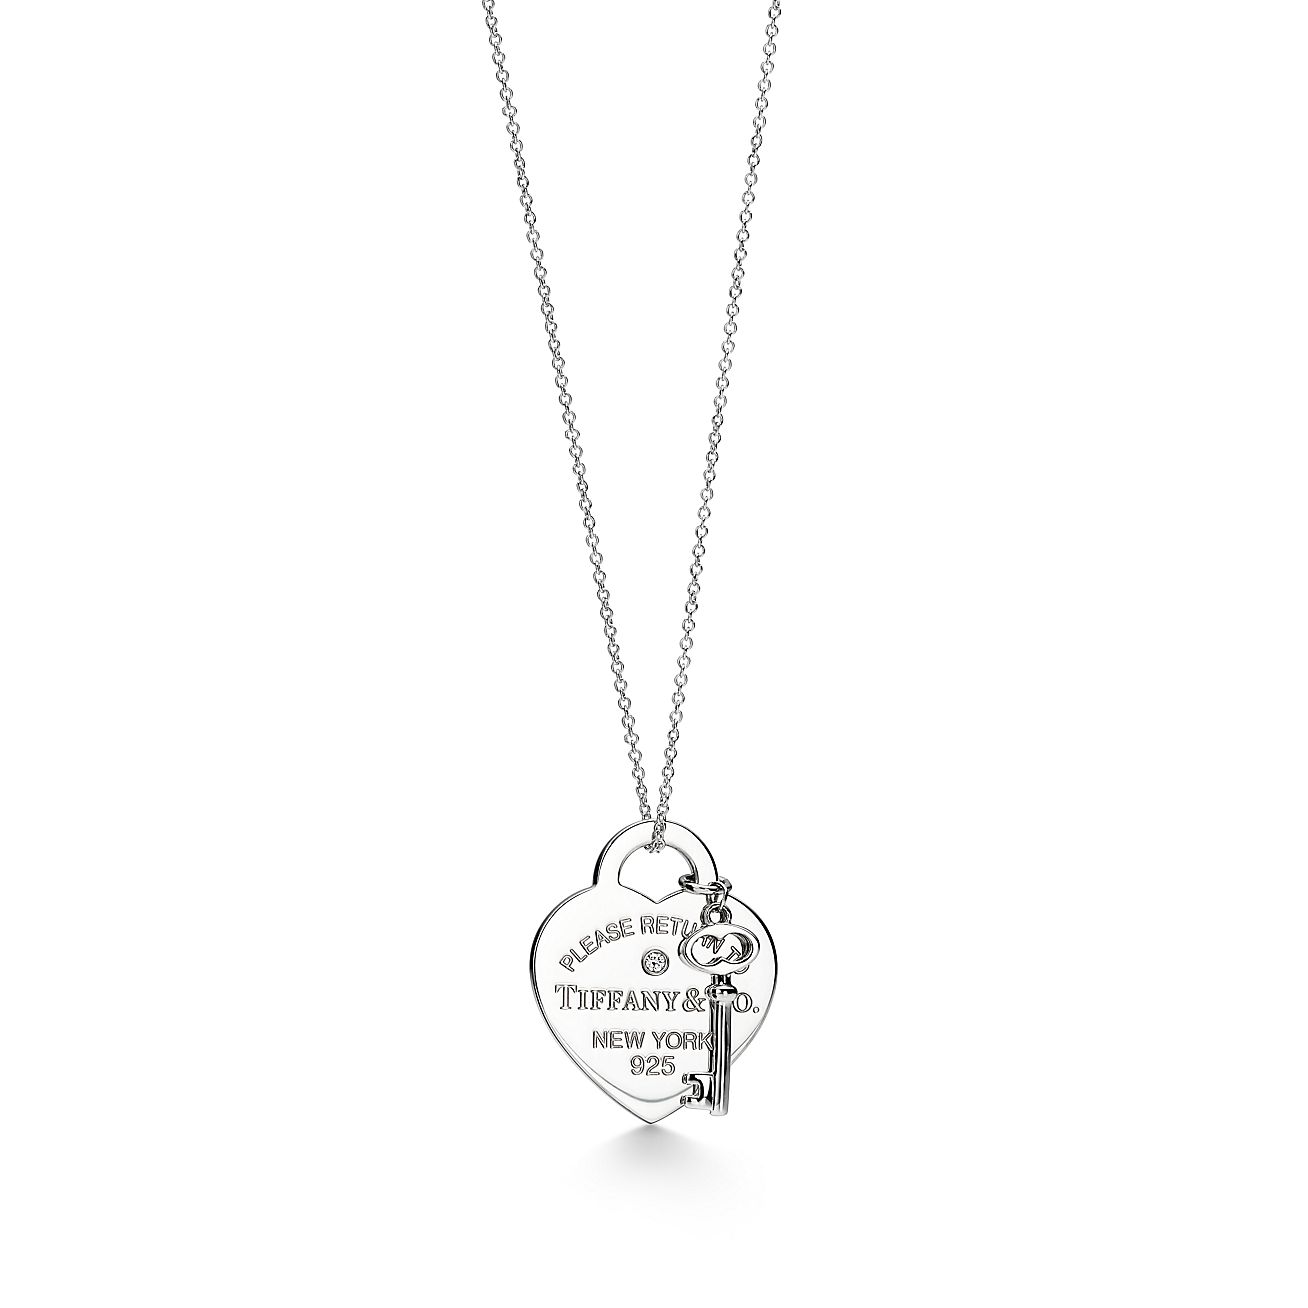 Return to Tiffany™ Heart Tag and Key Necklace in Silver with a Diamond, Medium | Tiffany & Co.